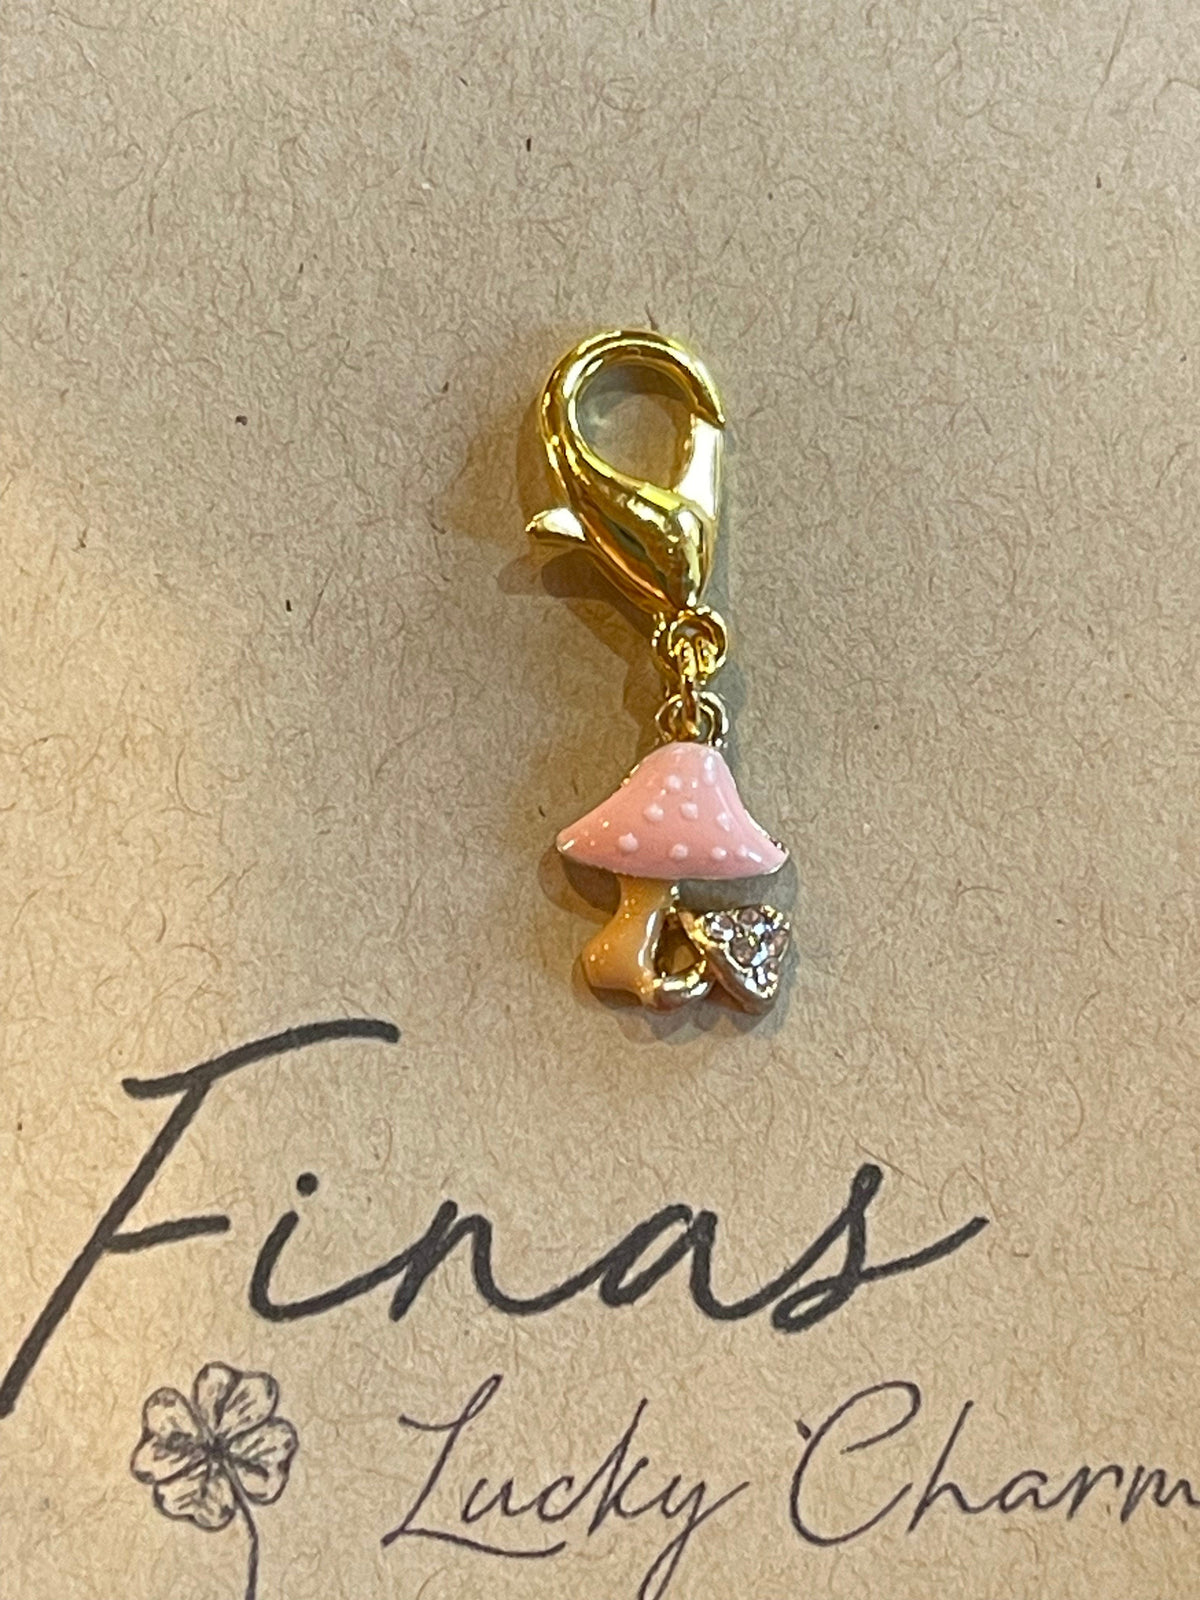 Fina's Lucky Charm charm Mushrooms Fina's Lucky Charm equestrian team apparel online tack store mobile tack store custom farm apparel custom show stable clothing equestrian lifestyle horse show clothing riding clothes horses equestrian tack store